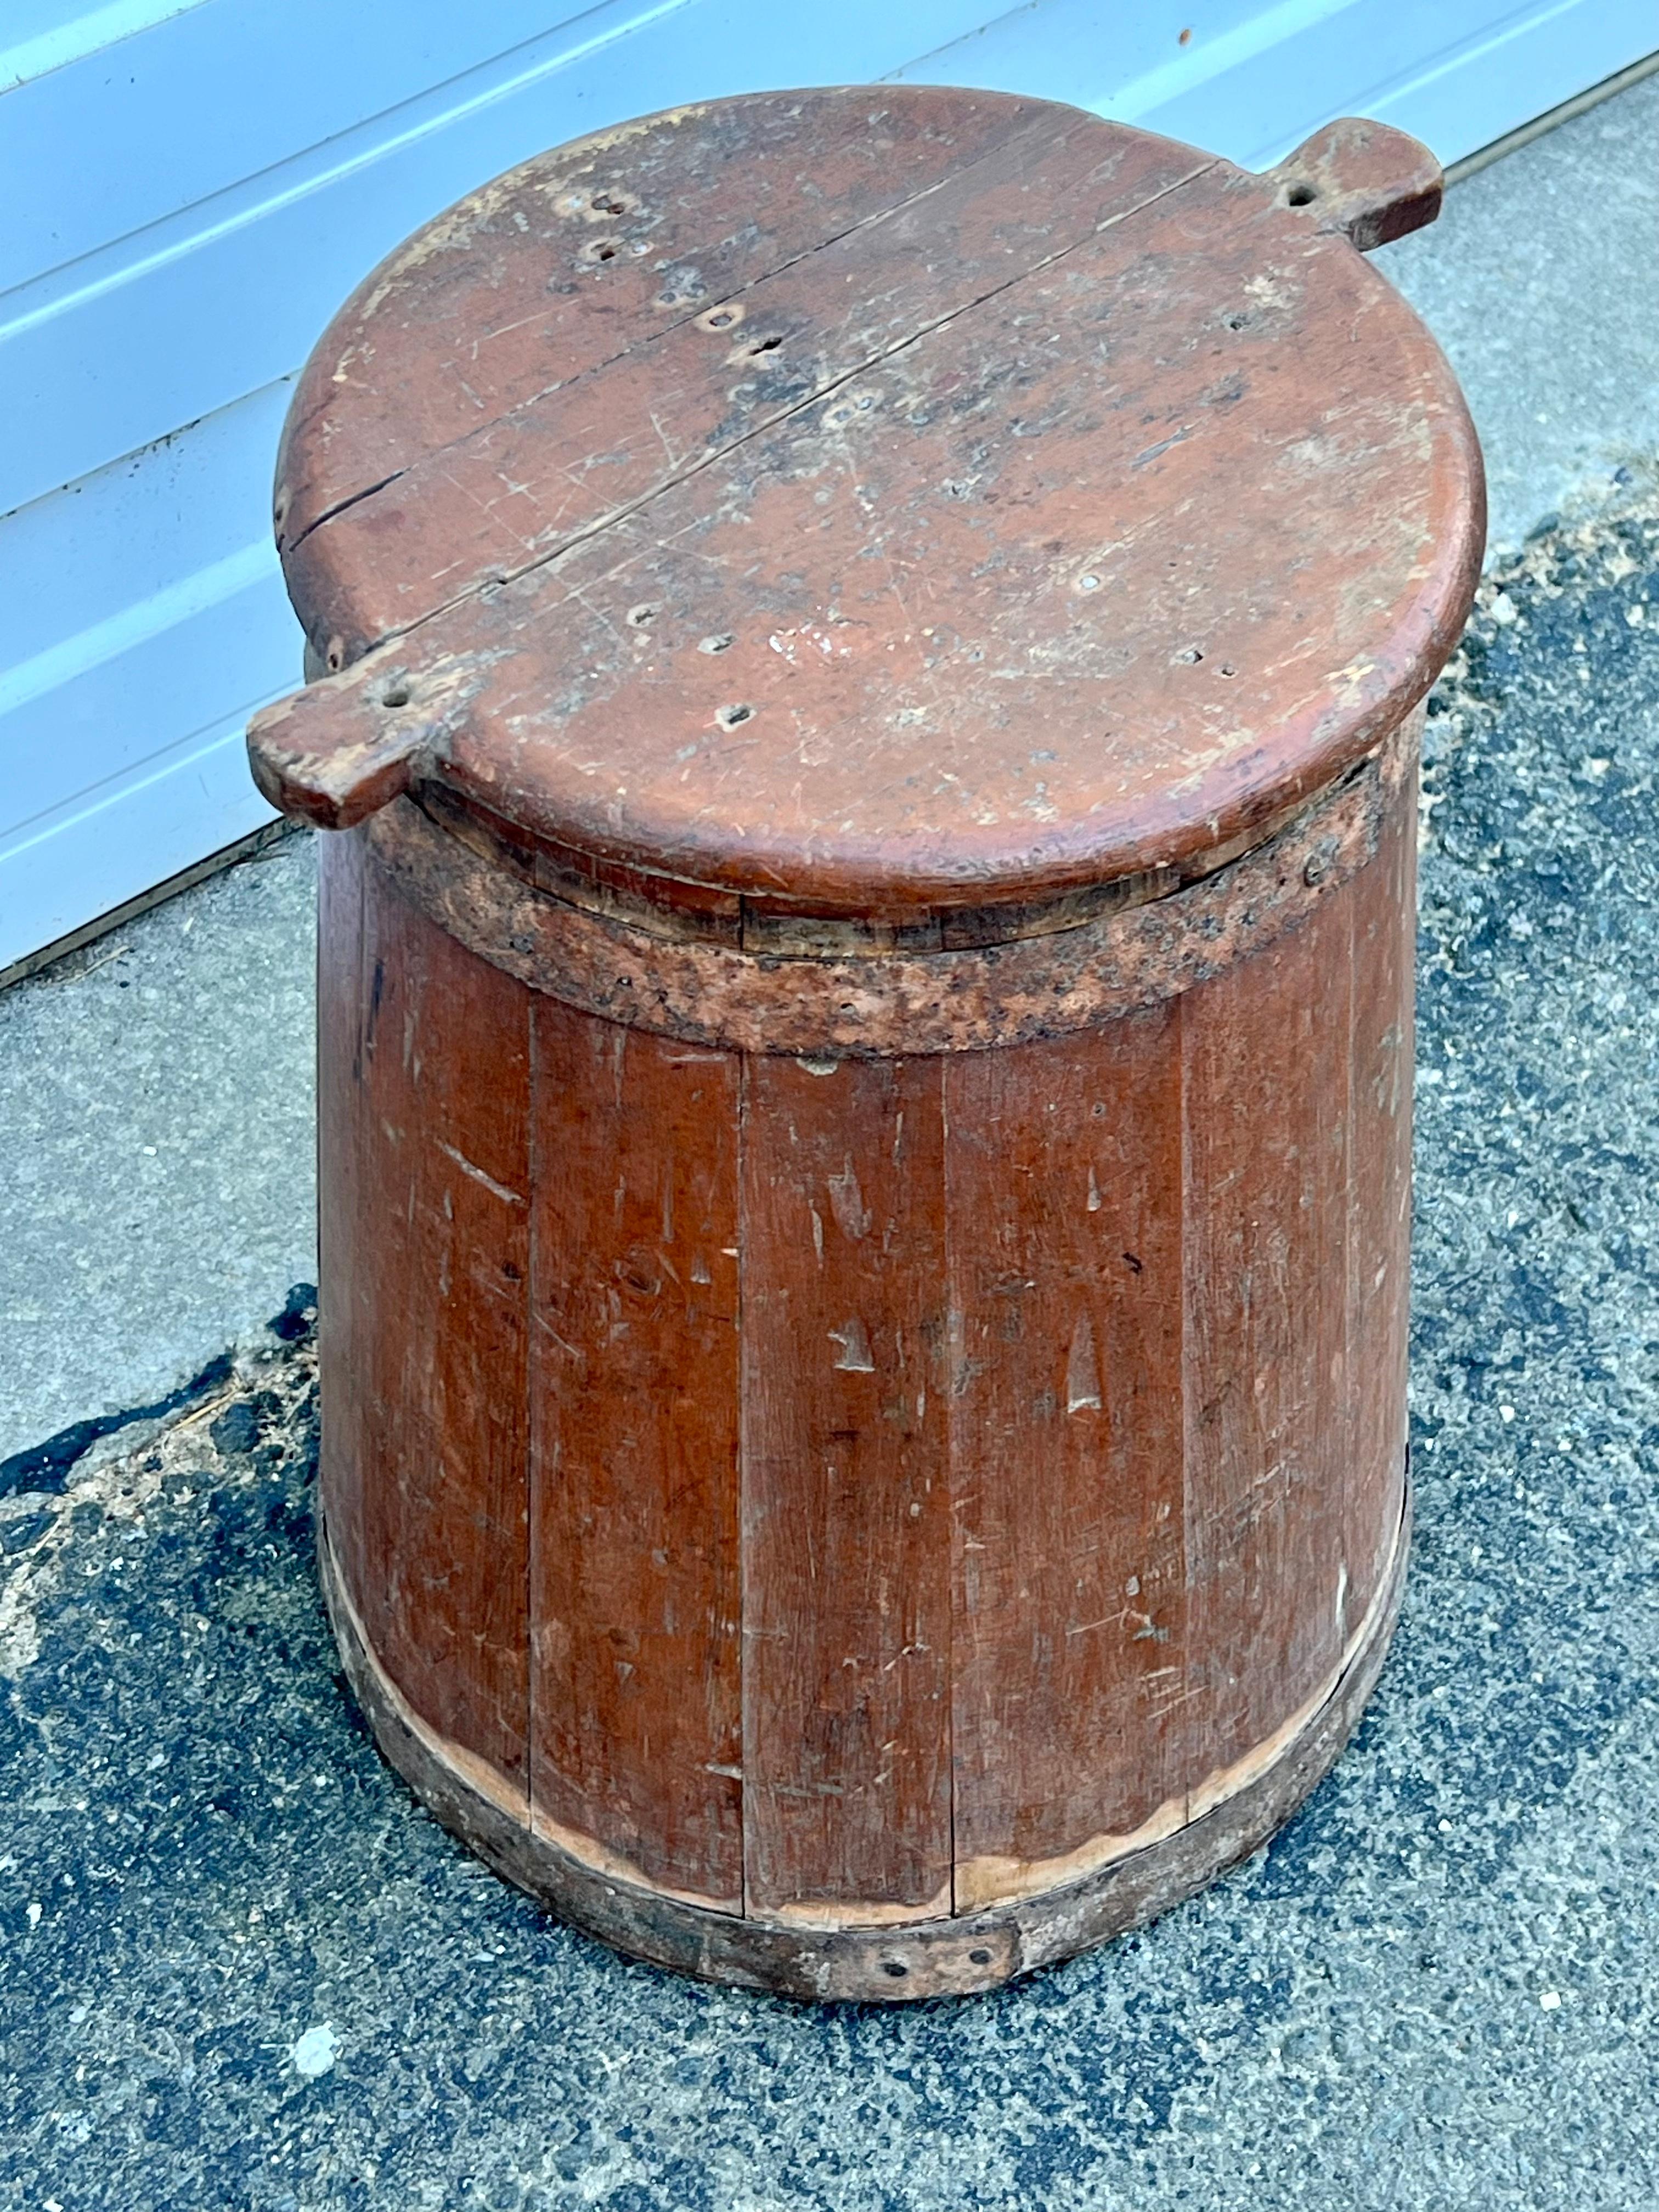 Lidded 19th century wooden bucket with slat and wrought iron banding construction.  Top removable, in all-over original reddish-brown paint.  Great little side table.